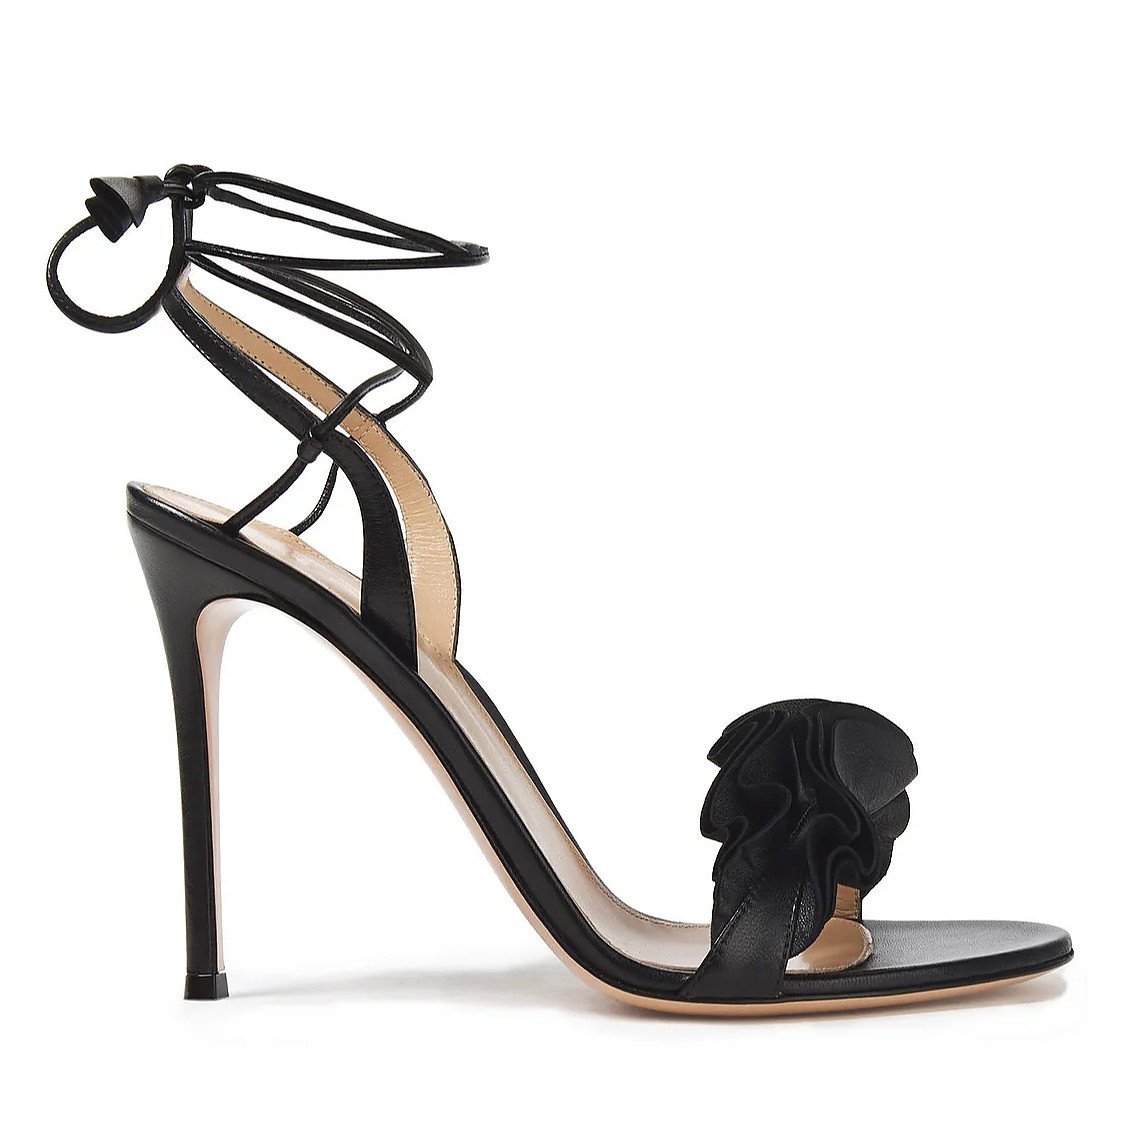 GIANVITO ROSSI Flora 105 Ruffle-Trimmed Leather Sandals